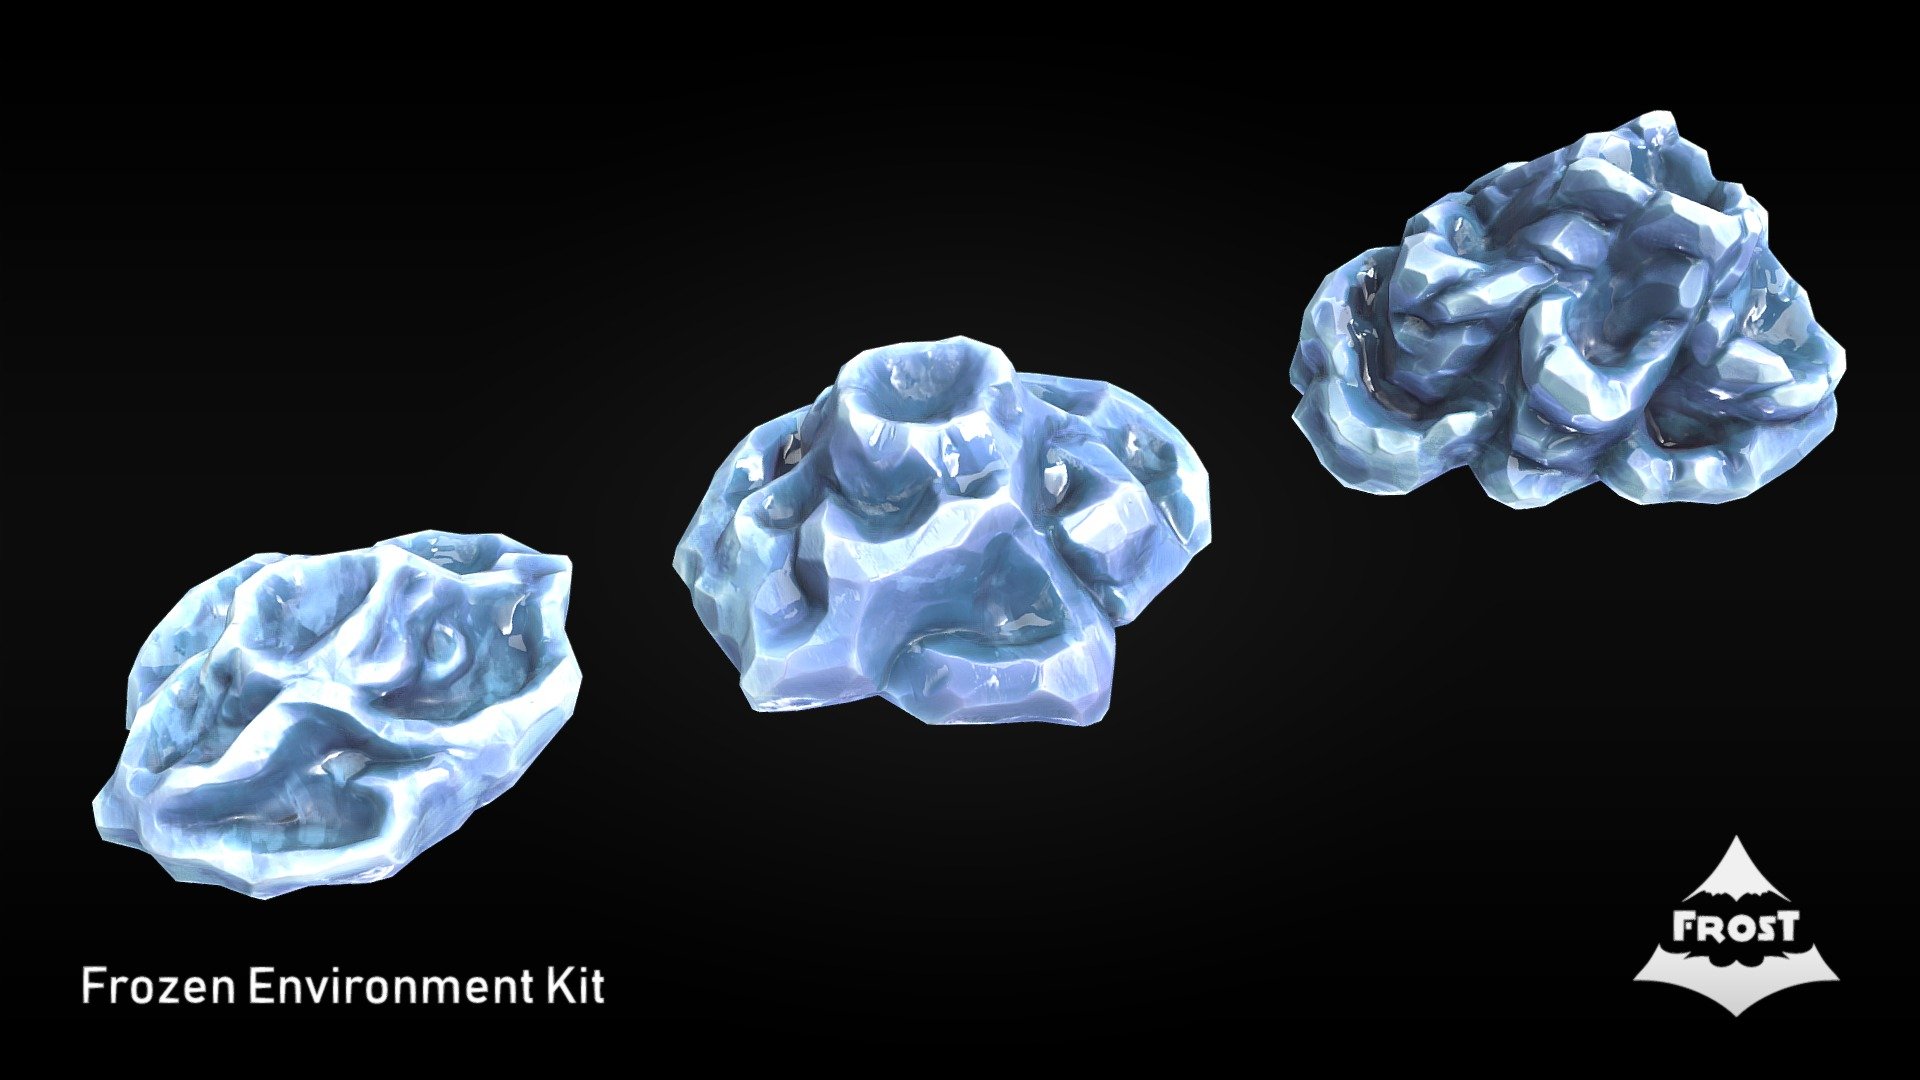 This pack is a fully PBR driven part of my FROST asset pack.
It contains the following assets:


3 Textured Frost Pools

Each asset comes with 4K resolution Albedo, Glossiness, Roughness, Normal, Emission, Specular Color, Specular Level, AO and Height Maps.
The Height Maps can be used in game or rendering engines to blend other textures with the asset. The textures were atlased onto a single texture sheet.
All of the assets are based on manually created high poly sculpts and had their textures specifically created for them. They were optimized for use in realtime game engines.
As PBR assets they are recommended for desktop but the polycount will have no problem running on mobile as well and can still be further reduced if necessary.

The FROST Environment Kit is split as separate packages so that you can purchase only those assets that you really need, for a significantly lower price compared to a full asset pack 3d model